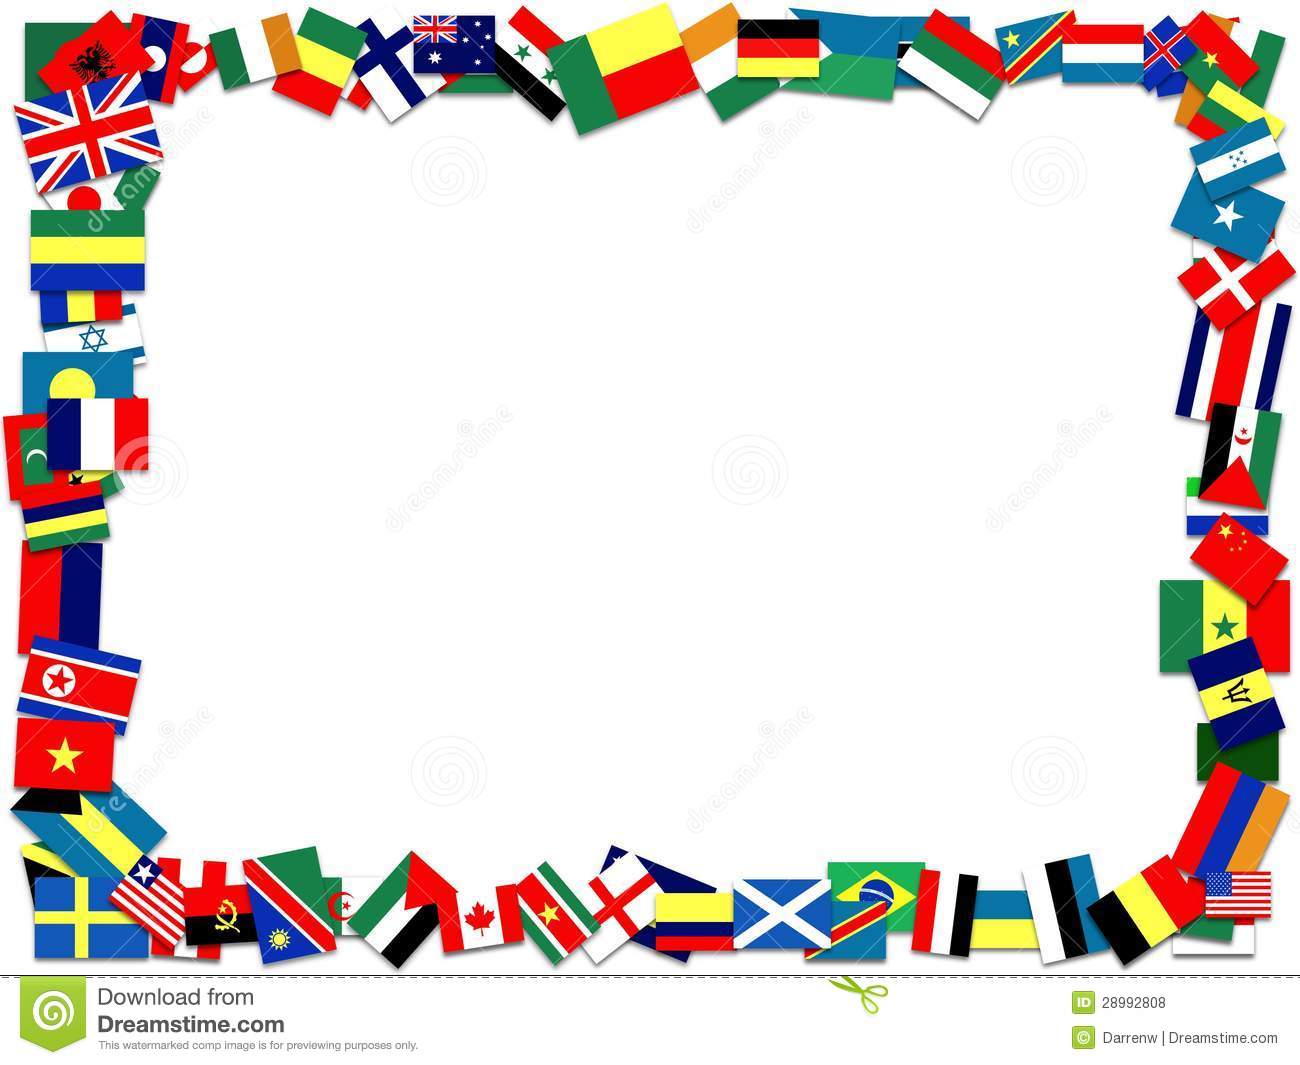 Illustration Of A Frame Made Of Many Flags